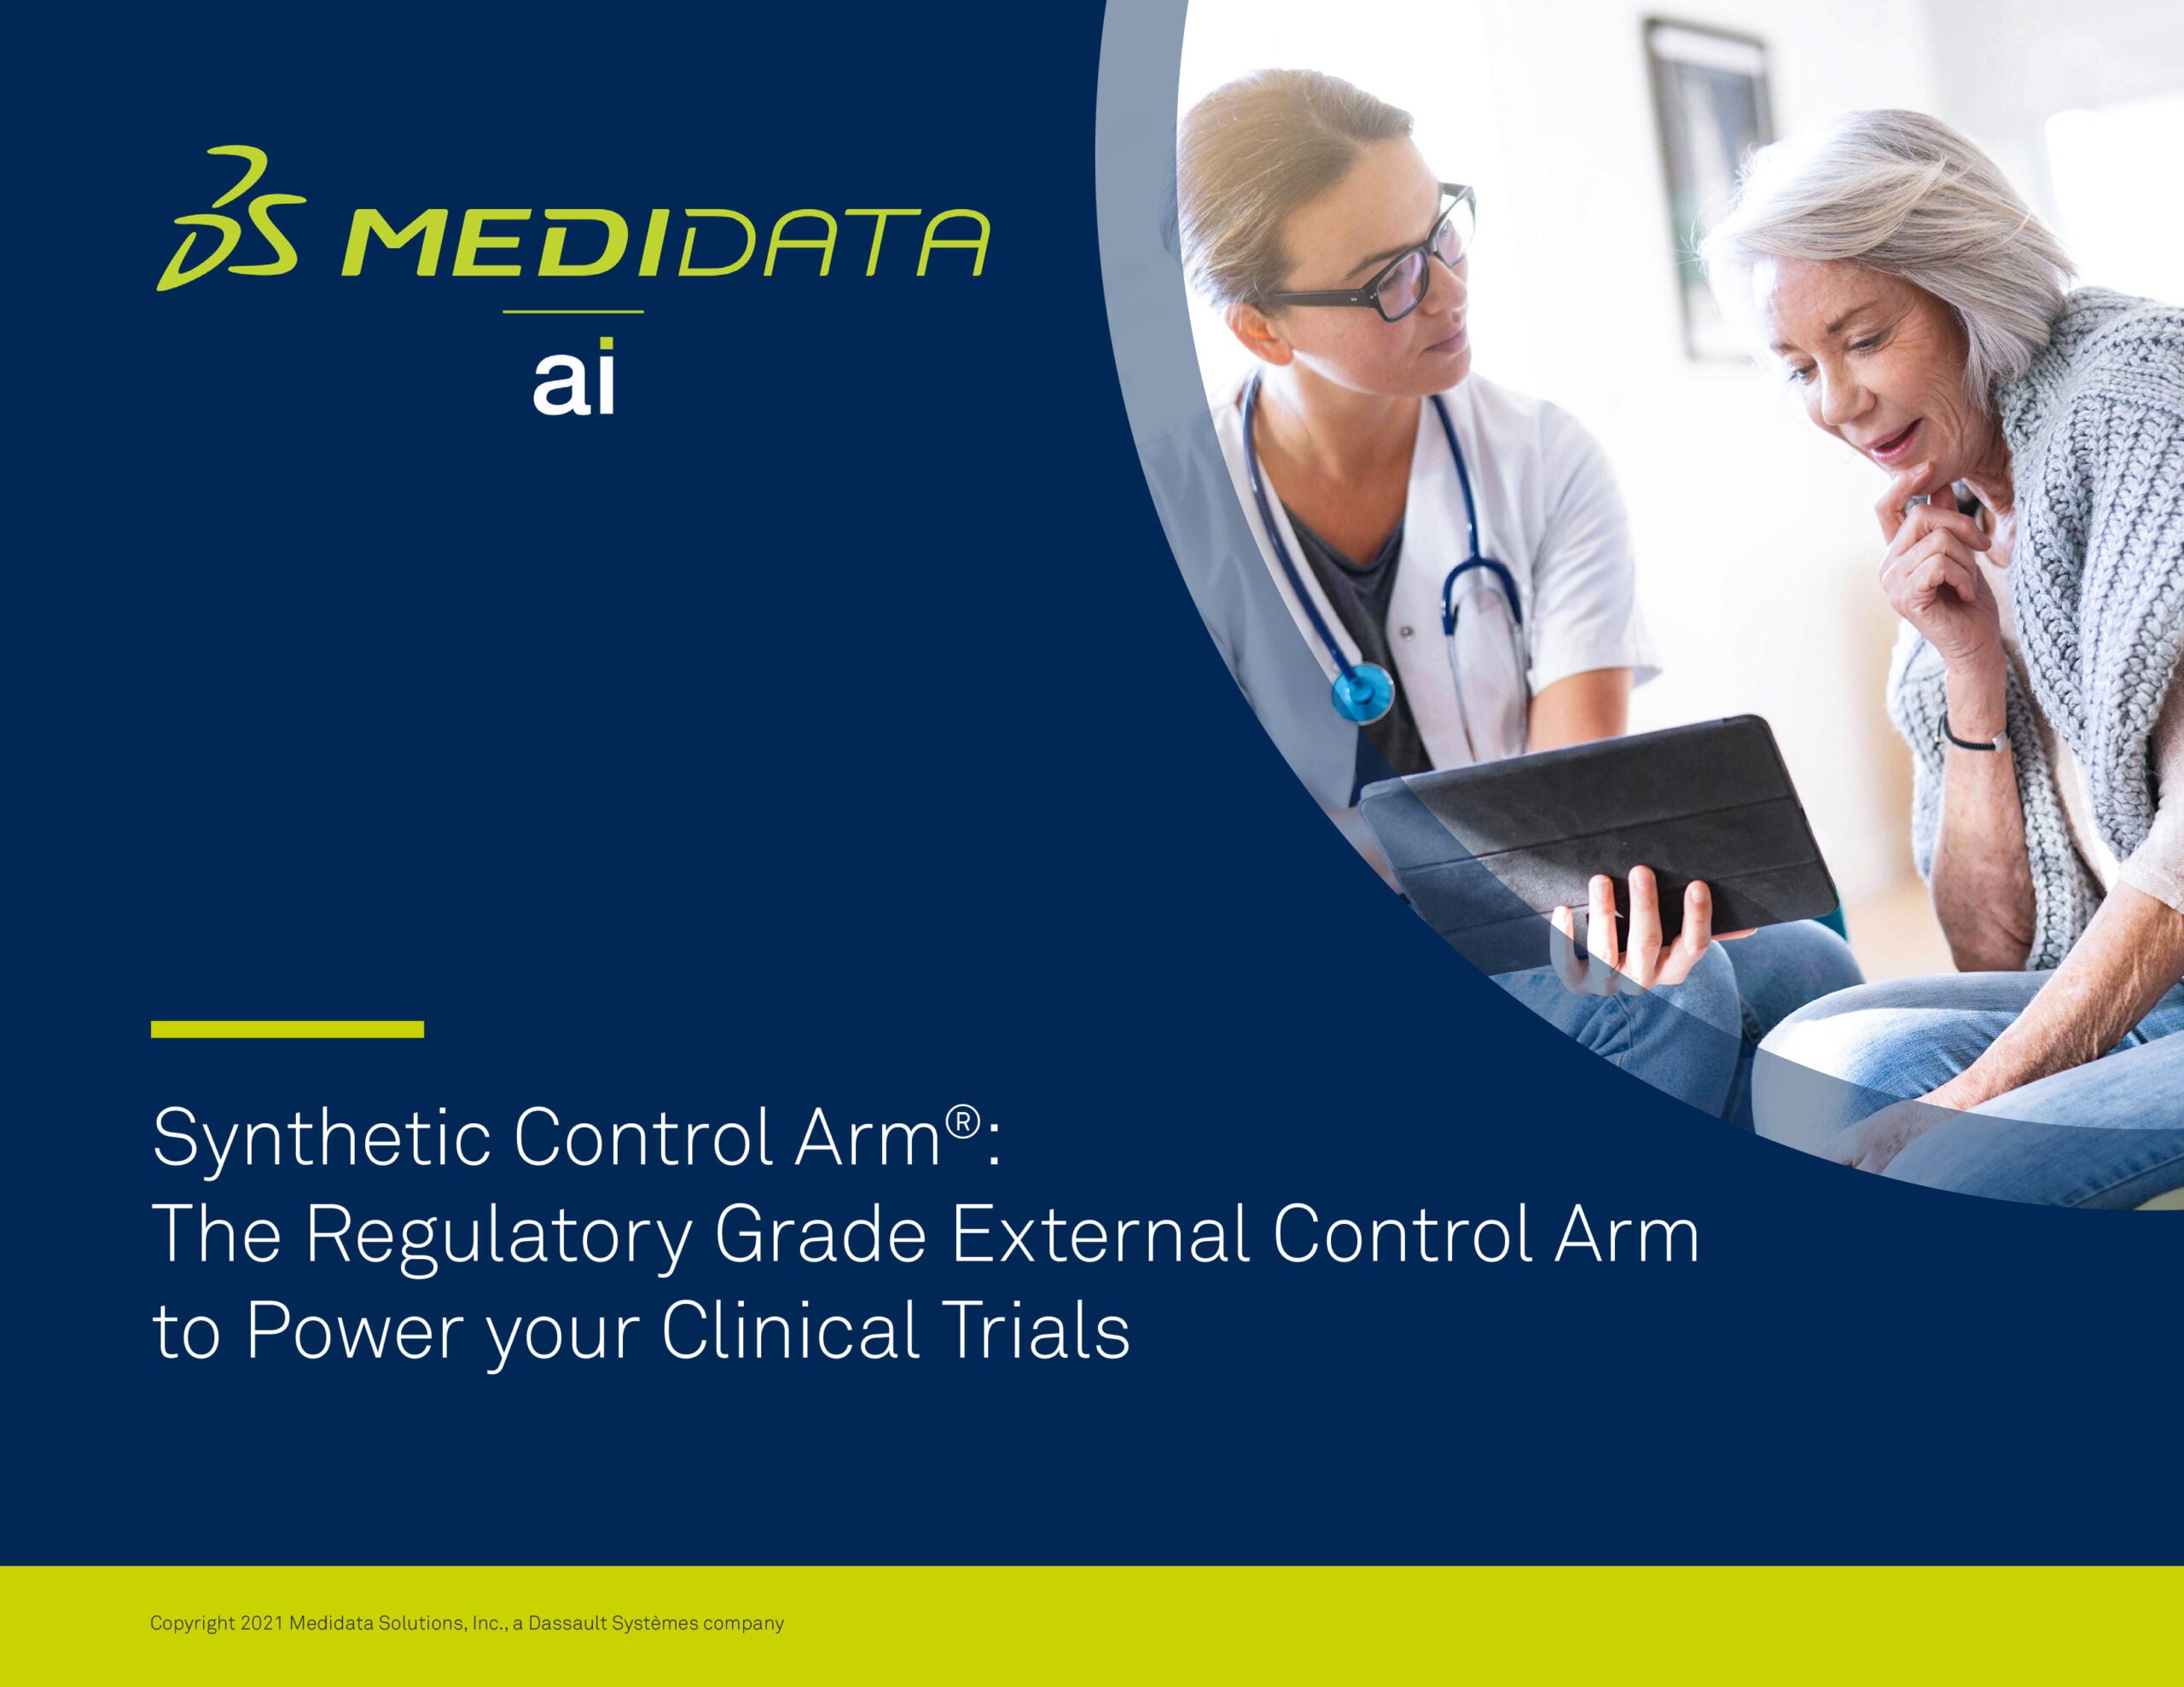 Synthetic Control Arm® : The Regulatory Grade External Control Arm to Power your Clinical Trials